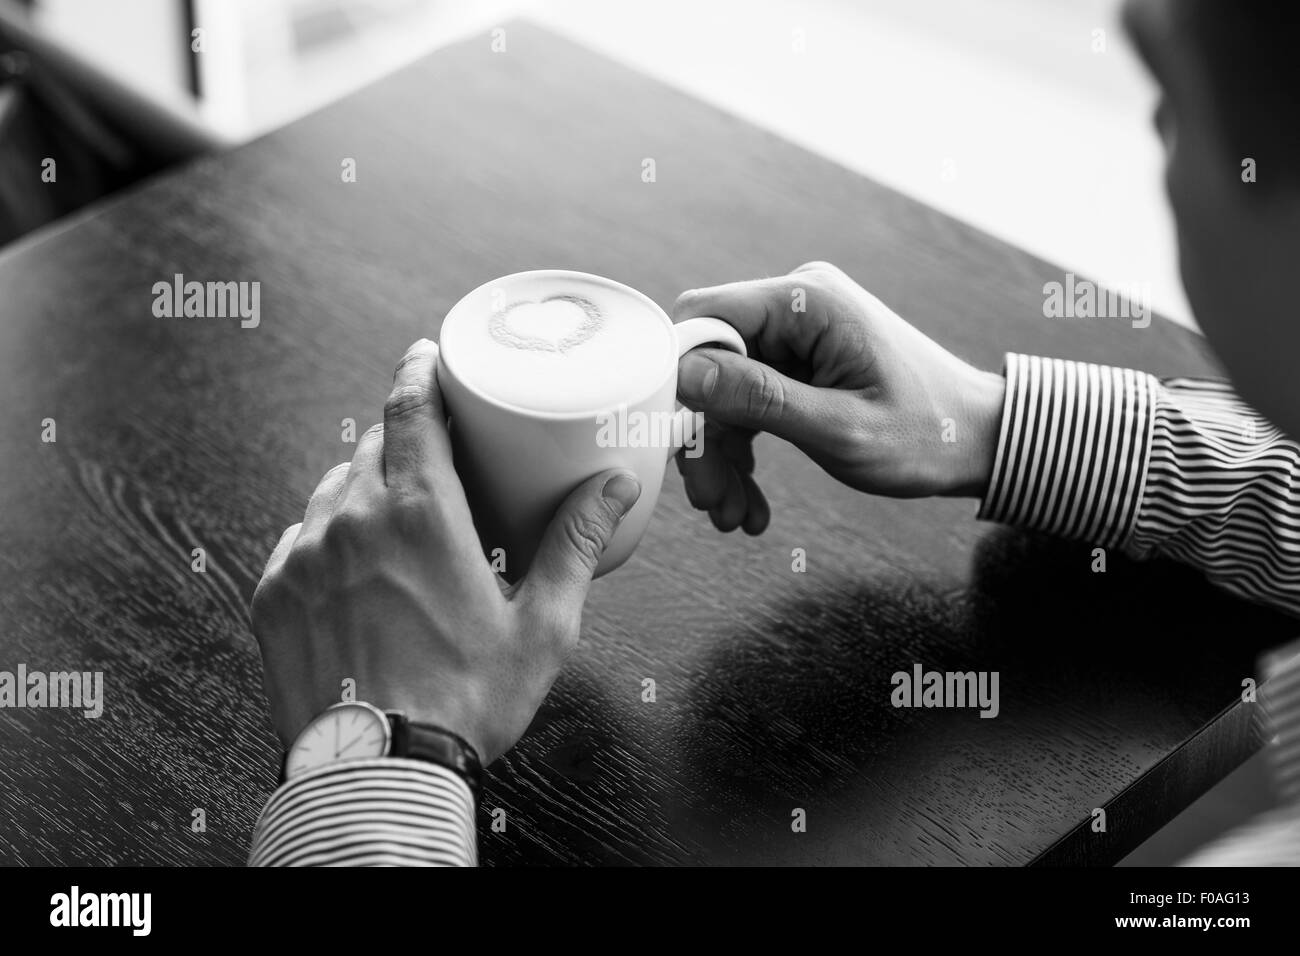 Businessman taking a break at the office as he enjoys a cup of hot aromatic coffee, close up view of his hands Stock Photo